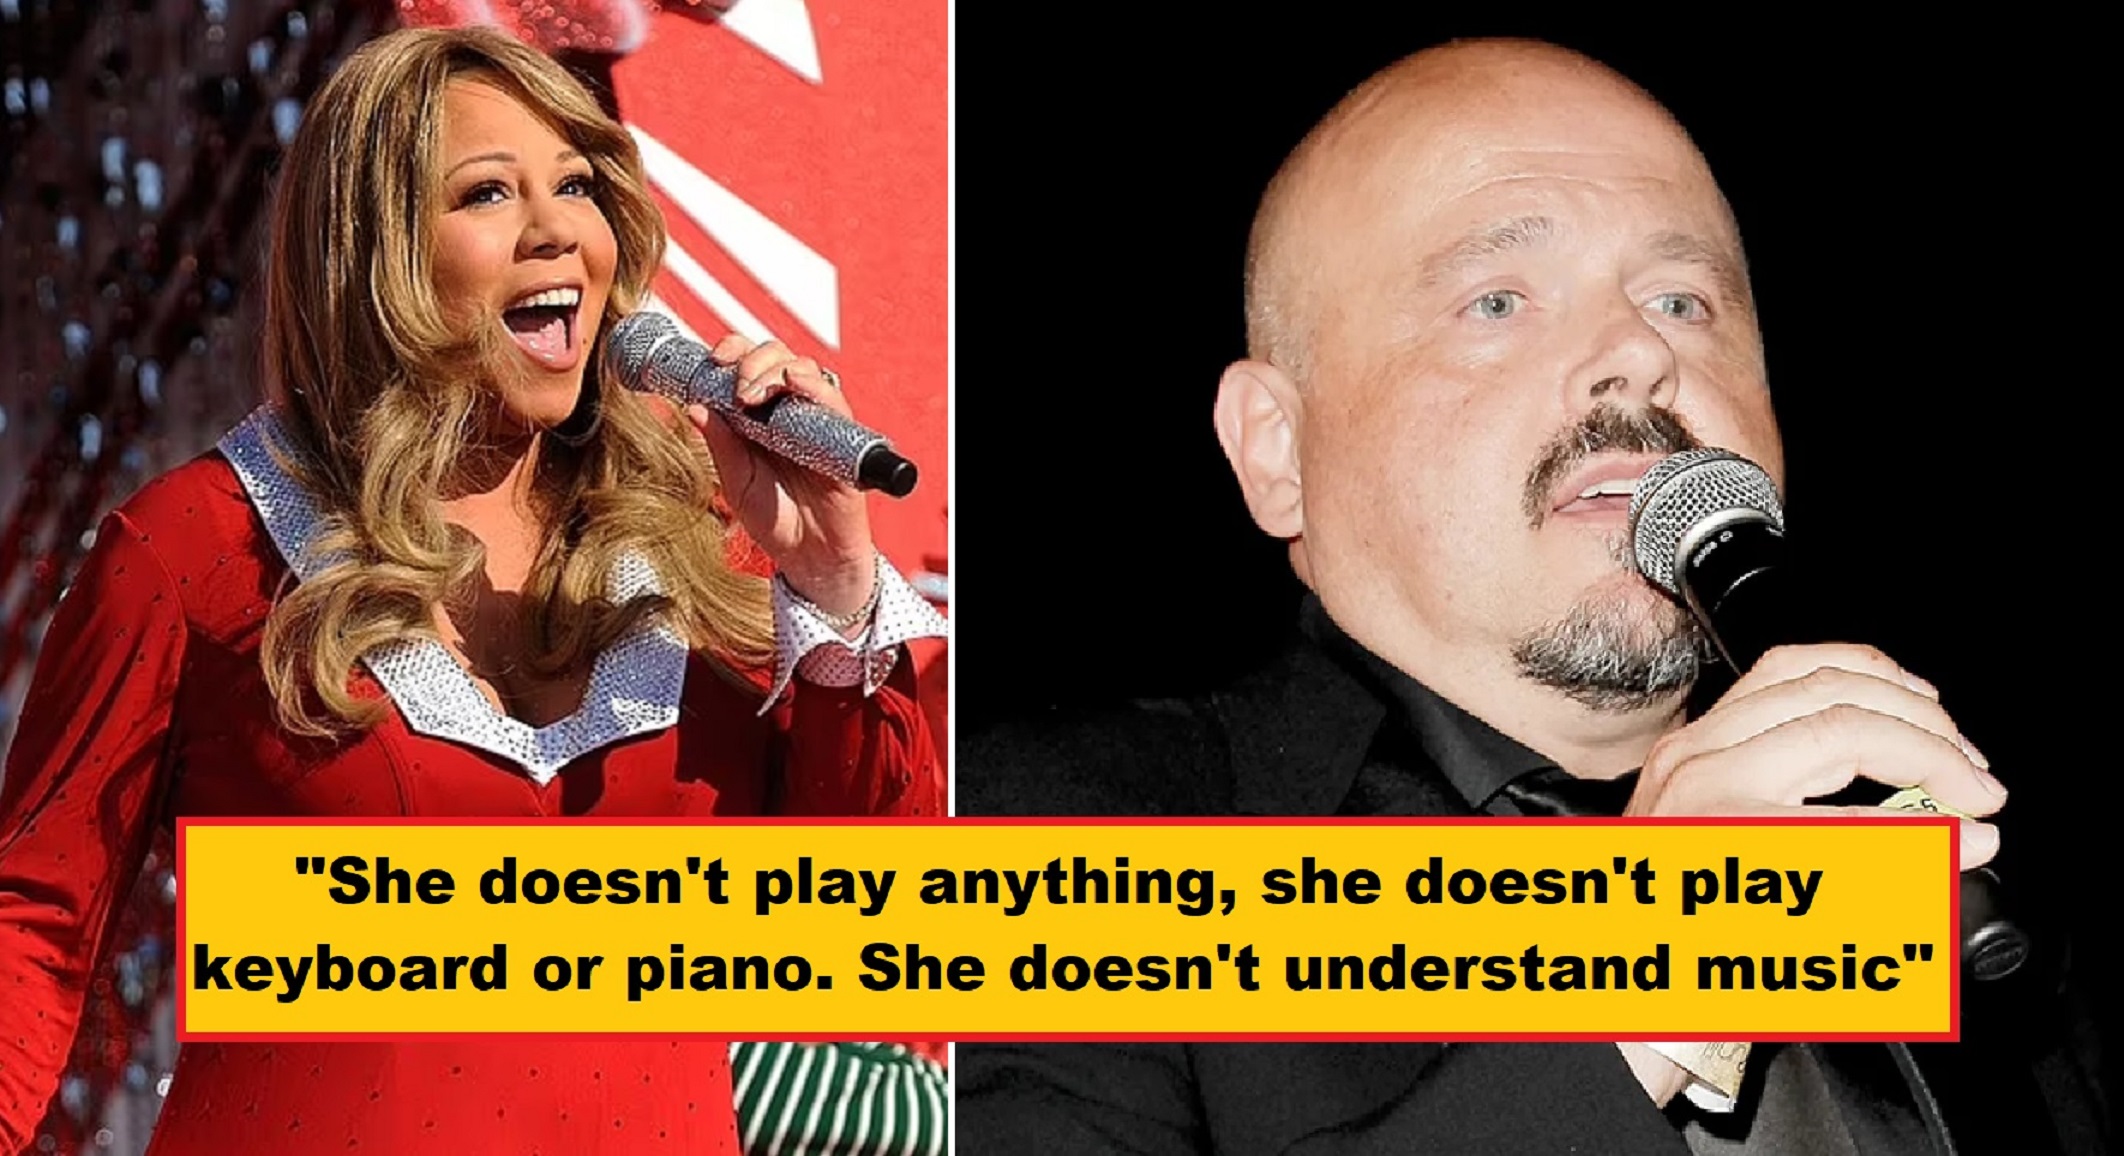 “She doesn’t understand music”: Co-Writer Of Mariah Carey’s ‘All I Want Want For Christmas’ Calls Her a LIAR